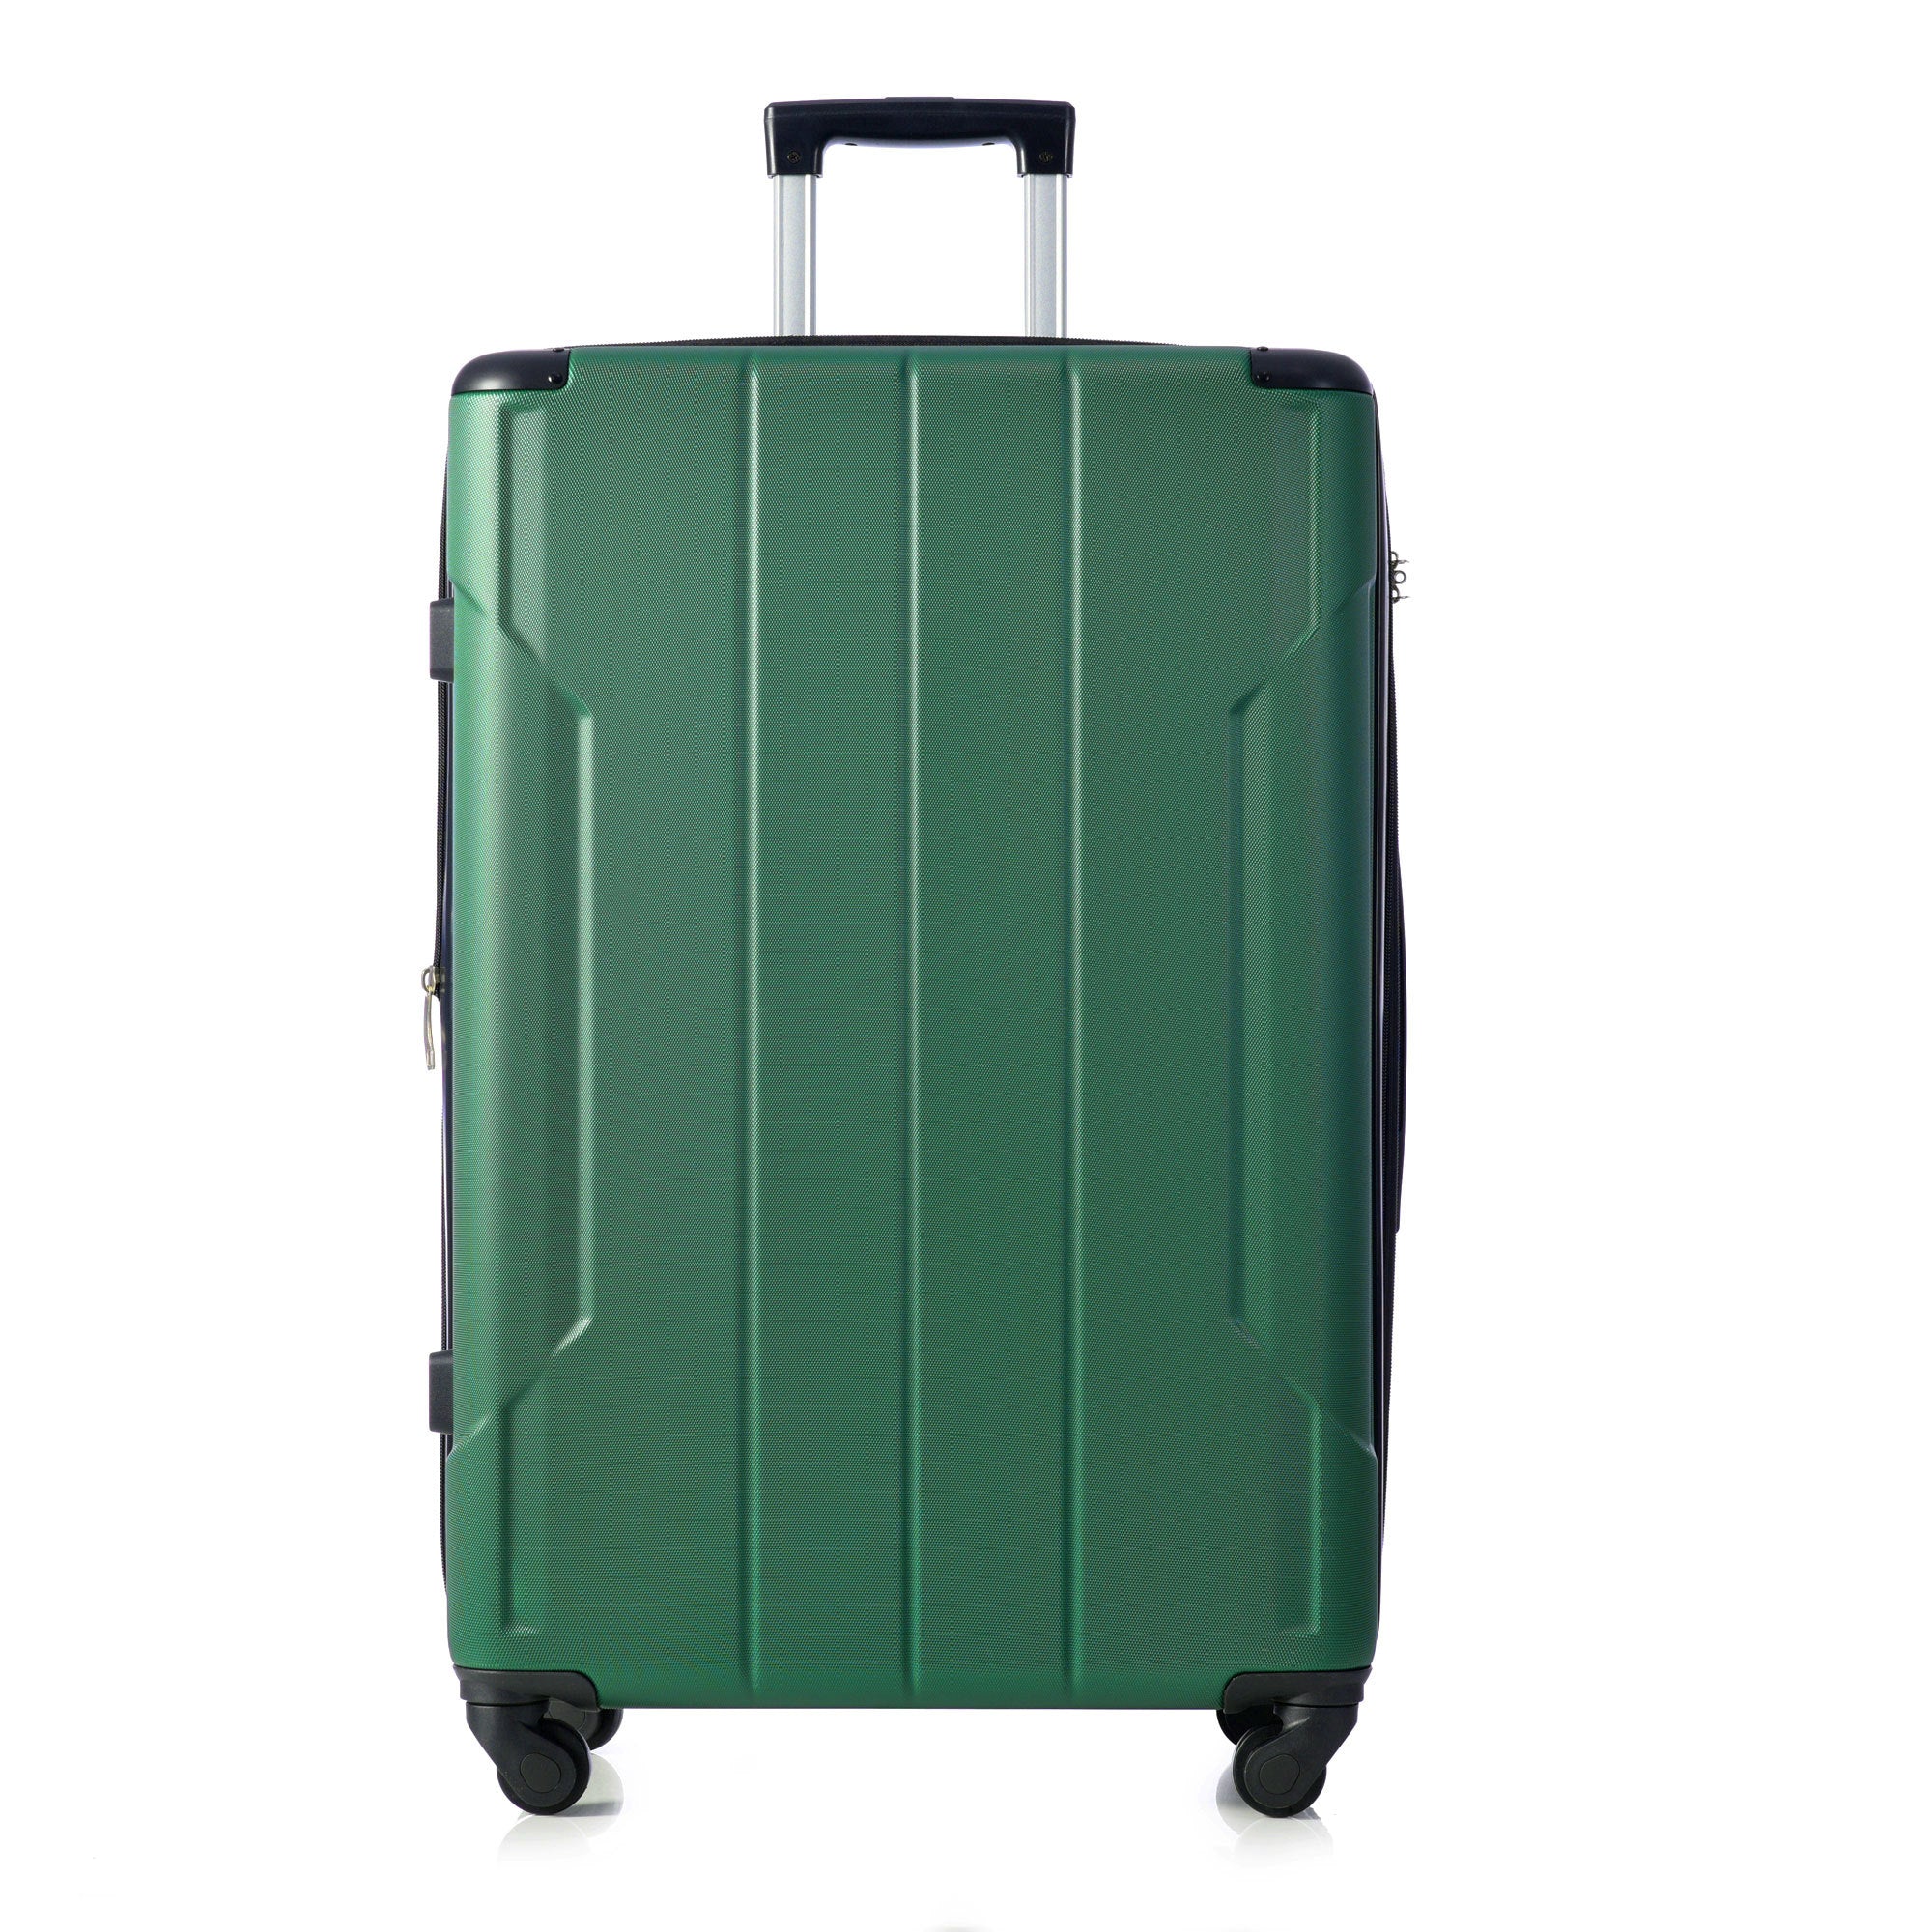 Hardside Luggage Sets 2 Piece Suitcase Set Expandable green-abs